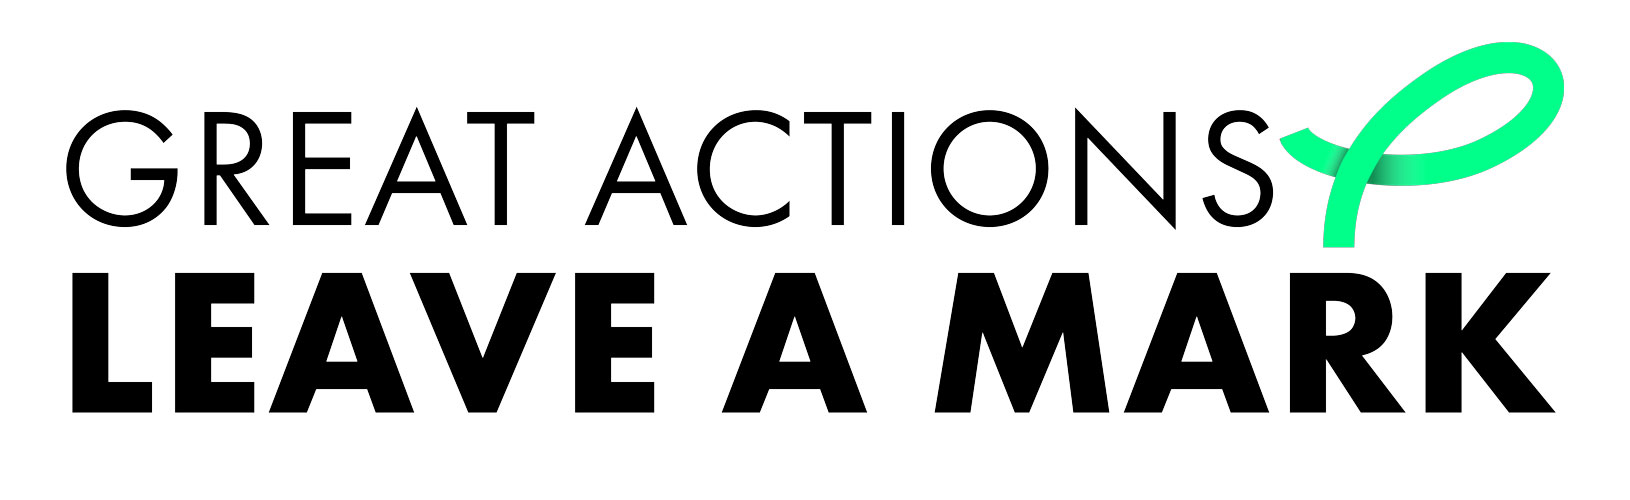 Great Actions Leave A Mark logo